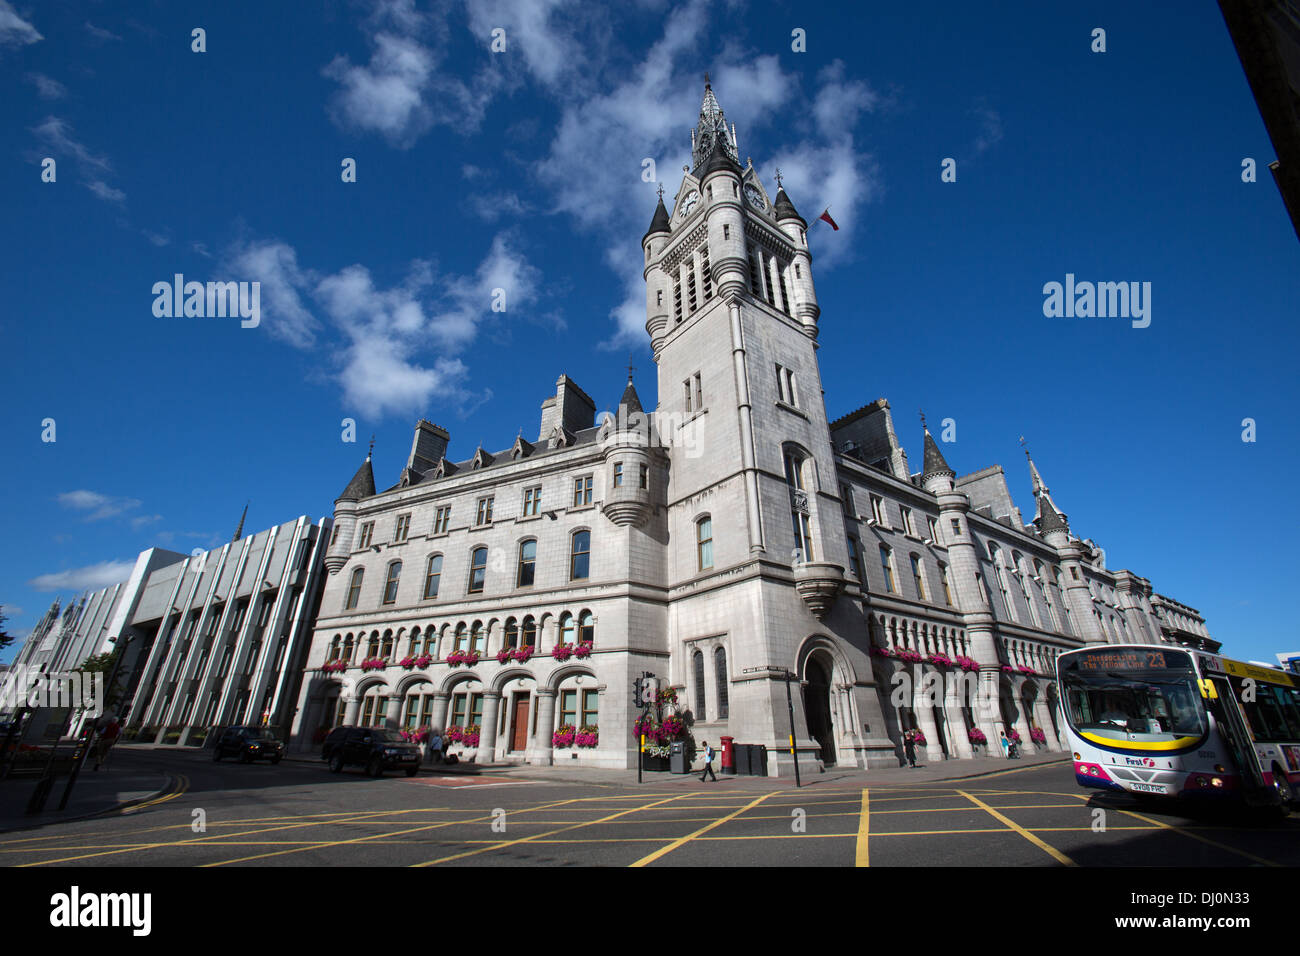 City of Aberdeen, Scotland. Picturesque view of Aberdeen’s Town House and Tolbooth. Stock Photo